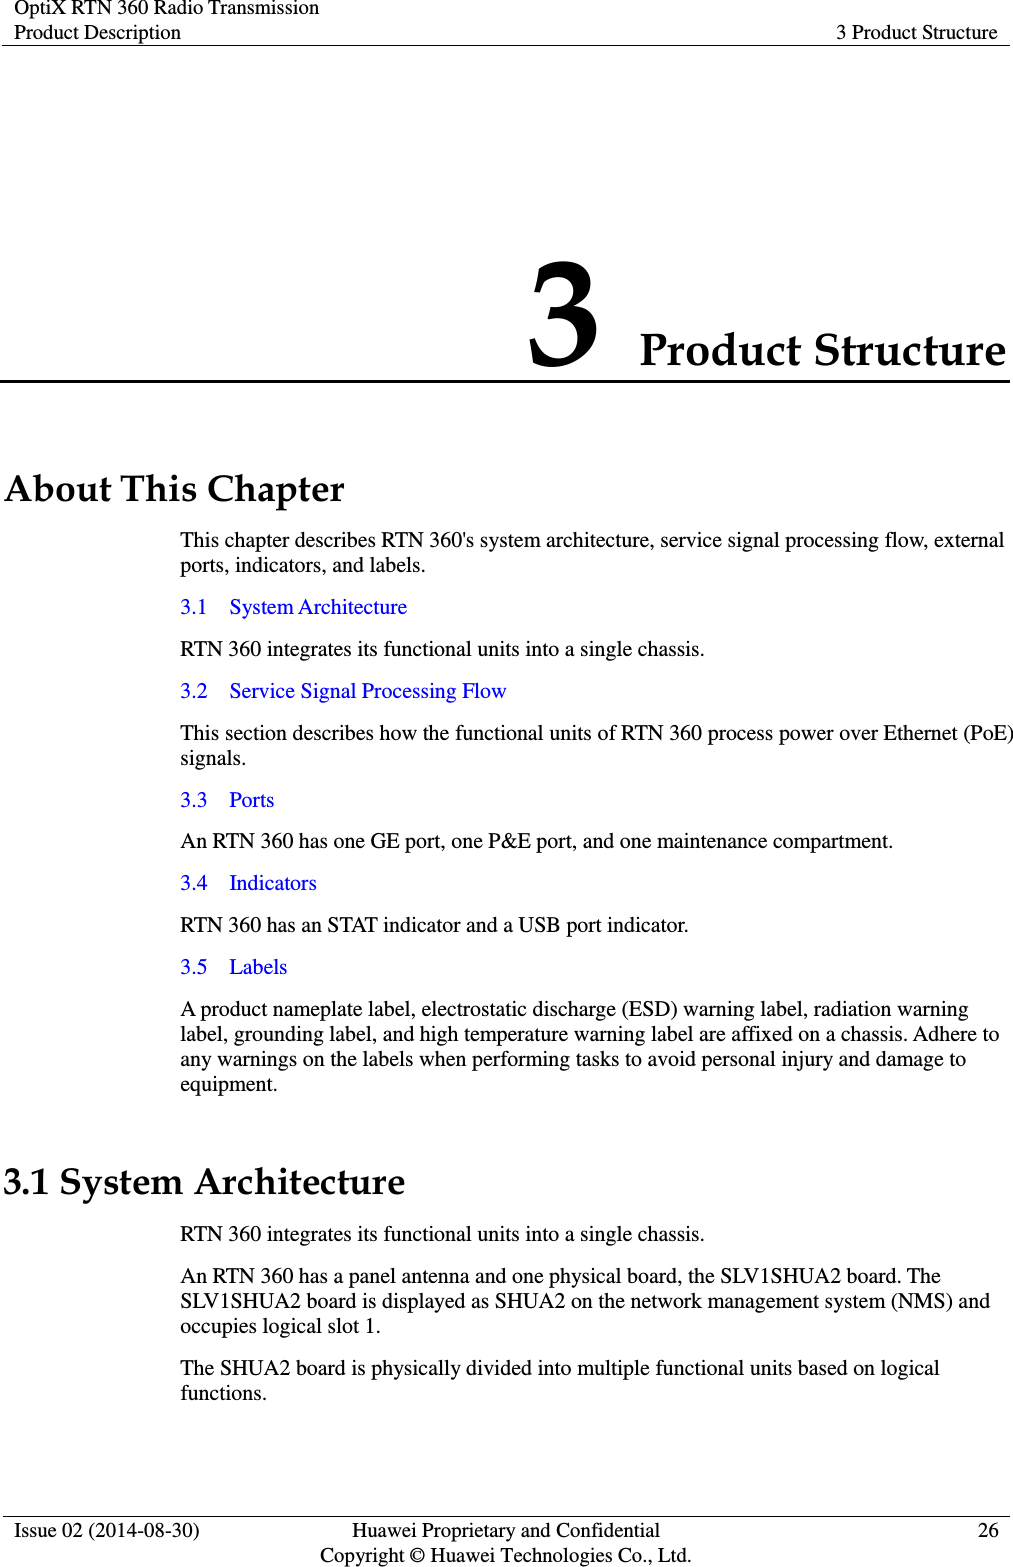 OptiX RTN 360 Radio Transmission Product Description 3 Product Structure  Issue 02 (2014-08-30) Huawei Proprietary and Confidential                                     Copyright © Huawei Technologies Co., Ltd. 26  3 Product Structure About This Chapter This chapter describes RTN 360&apos;s system architecture, service signal processing flow, external ports, indicators, and labels. 3.1    System Architecture RTN 360 integrates its functional units into a single chassis. 3.2    Service Signal Processing Flow This section describes how the functional units of RTN 360 process power over Ethernet (PoE) signals. 3.3    Ports An RTN 360 has one GE port, one P&amp;E port, and one maintenance compartment. 3.4    Indicators RTN 360 has an STAT indicator and a USB port indicator. 3.5    Labels A product nameplate label, electrostatic discharge (ESD) warning label, radiation warning label, grounding label, and high temperature warning label are affixed on a chassis. Adhere to any warnings on the labels when performing tasks to avoid personal injury and damage to equipment. 3.1 System Architecture RTN 360 integrates its functional units into a single chassis. An RTN 360 has a panel antenna and one physical board, the SLV1SHUA2 board. The SLV1SHUA2 board is displayed as SHUA2 on the network management system (NMS) and occupies logical slot 1. The SHUA2 board is physically divided into multiple functional units based on logical functions. 